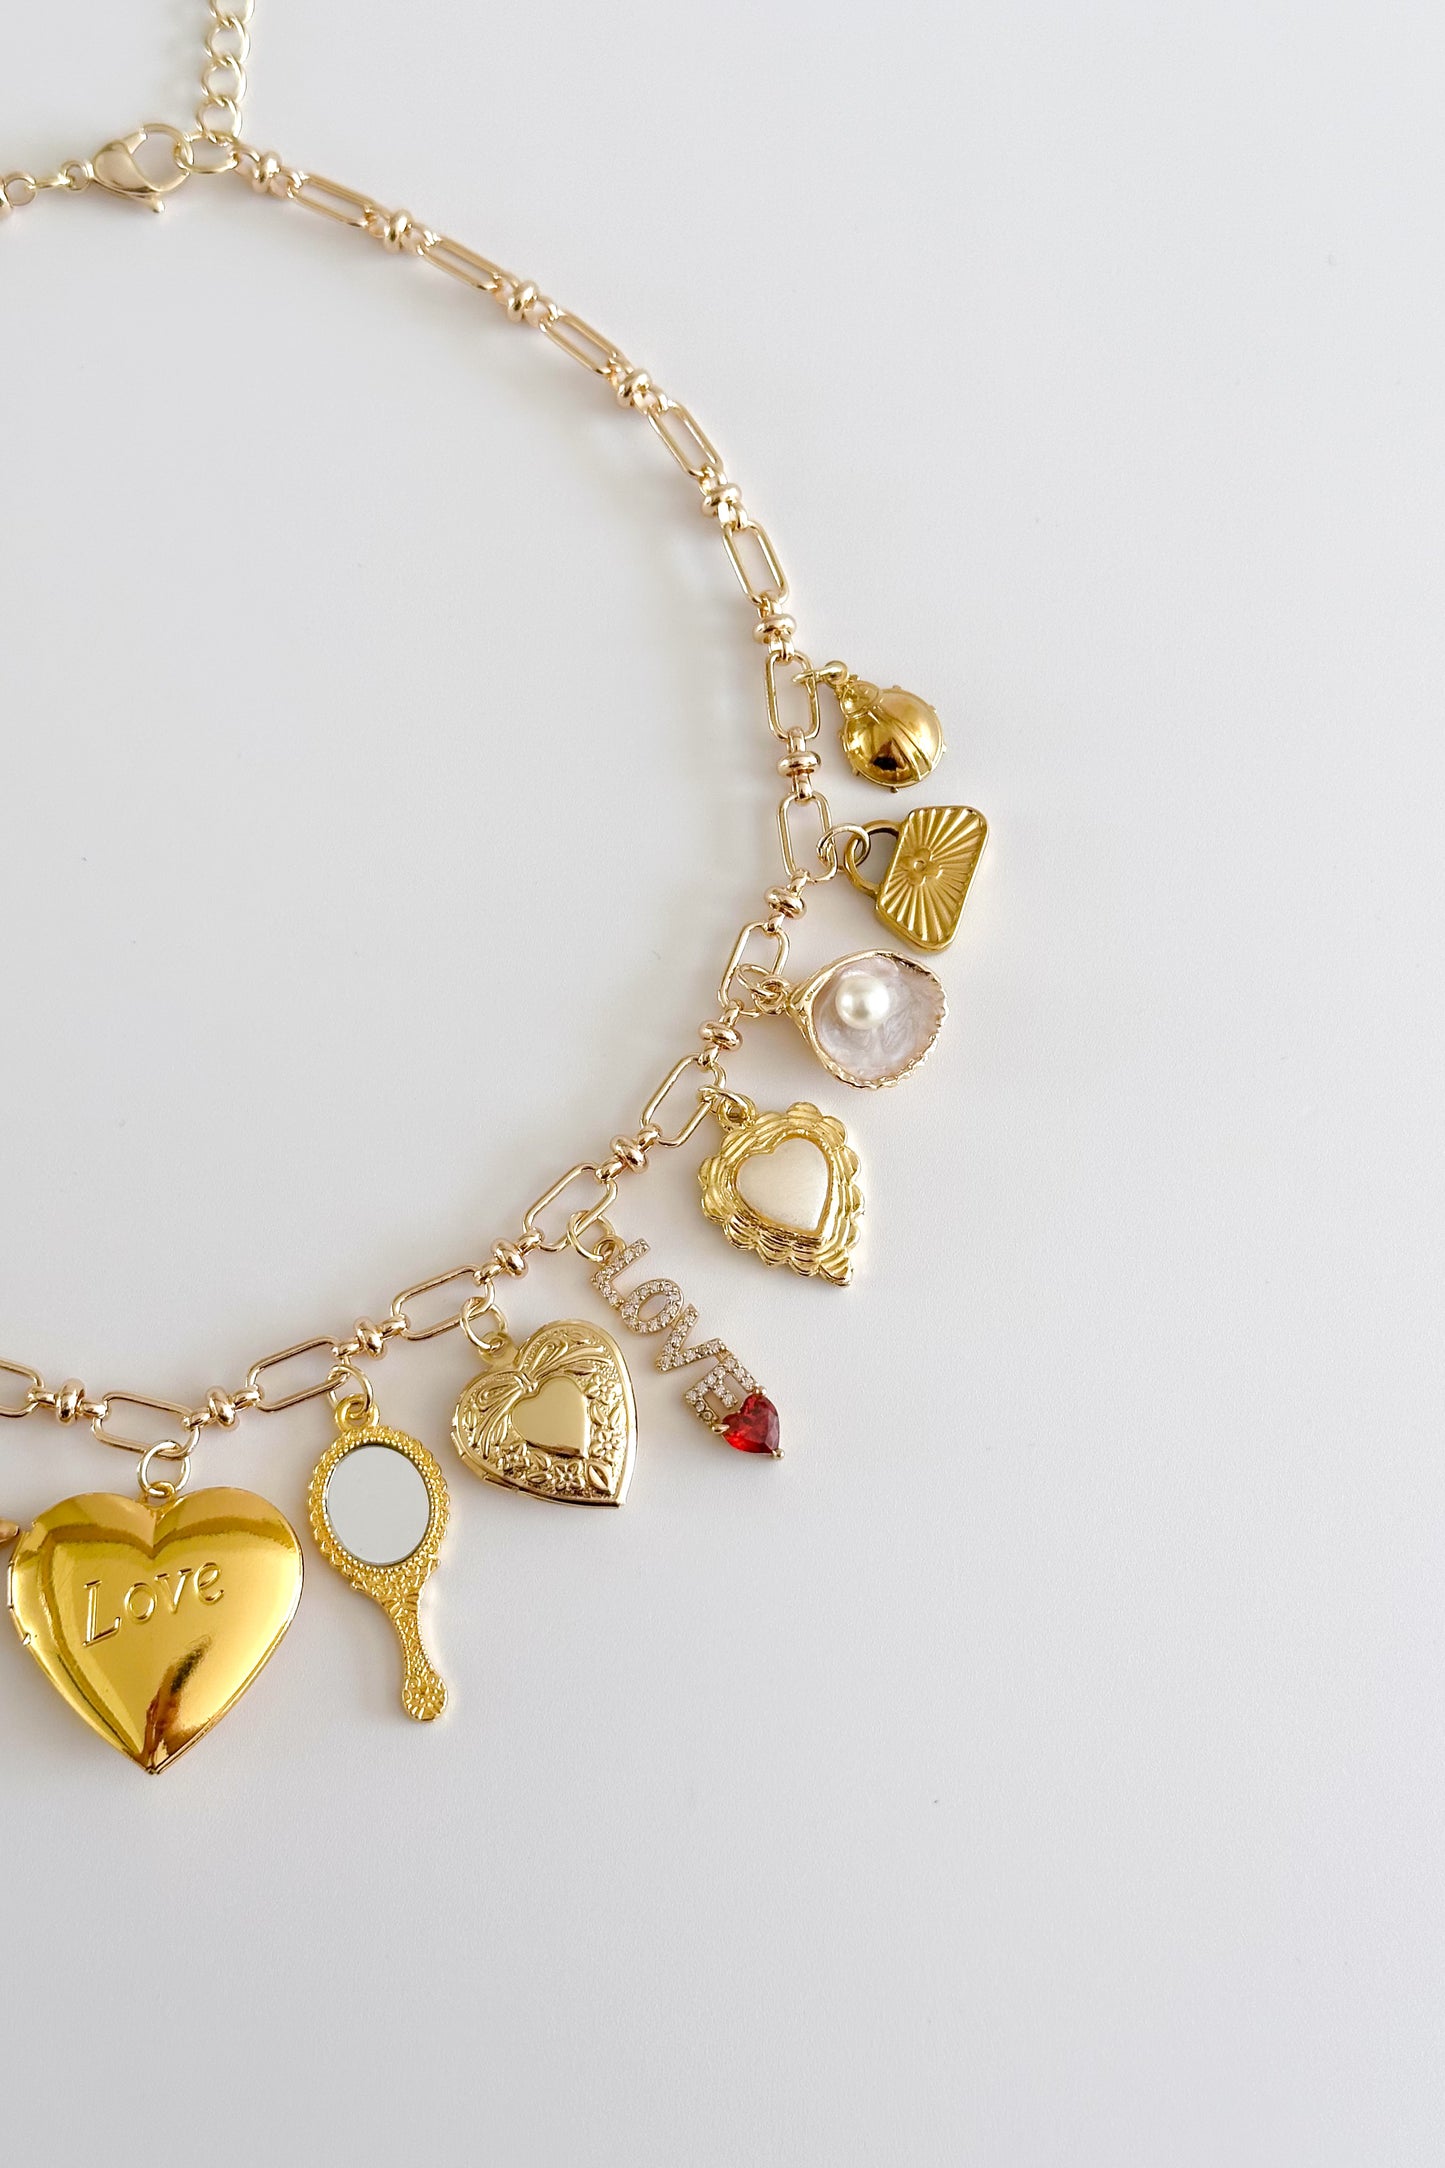 Love & Romance Gold Plated Statement Vintage Charm Necklace